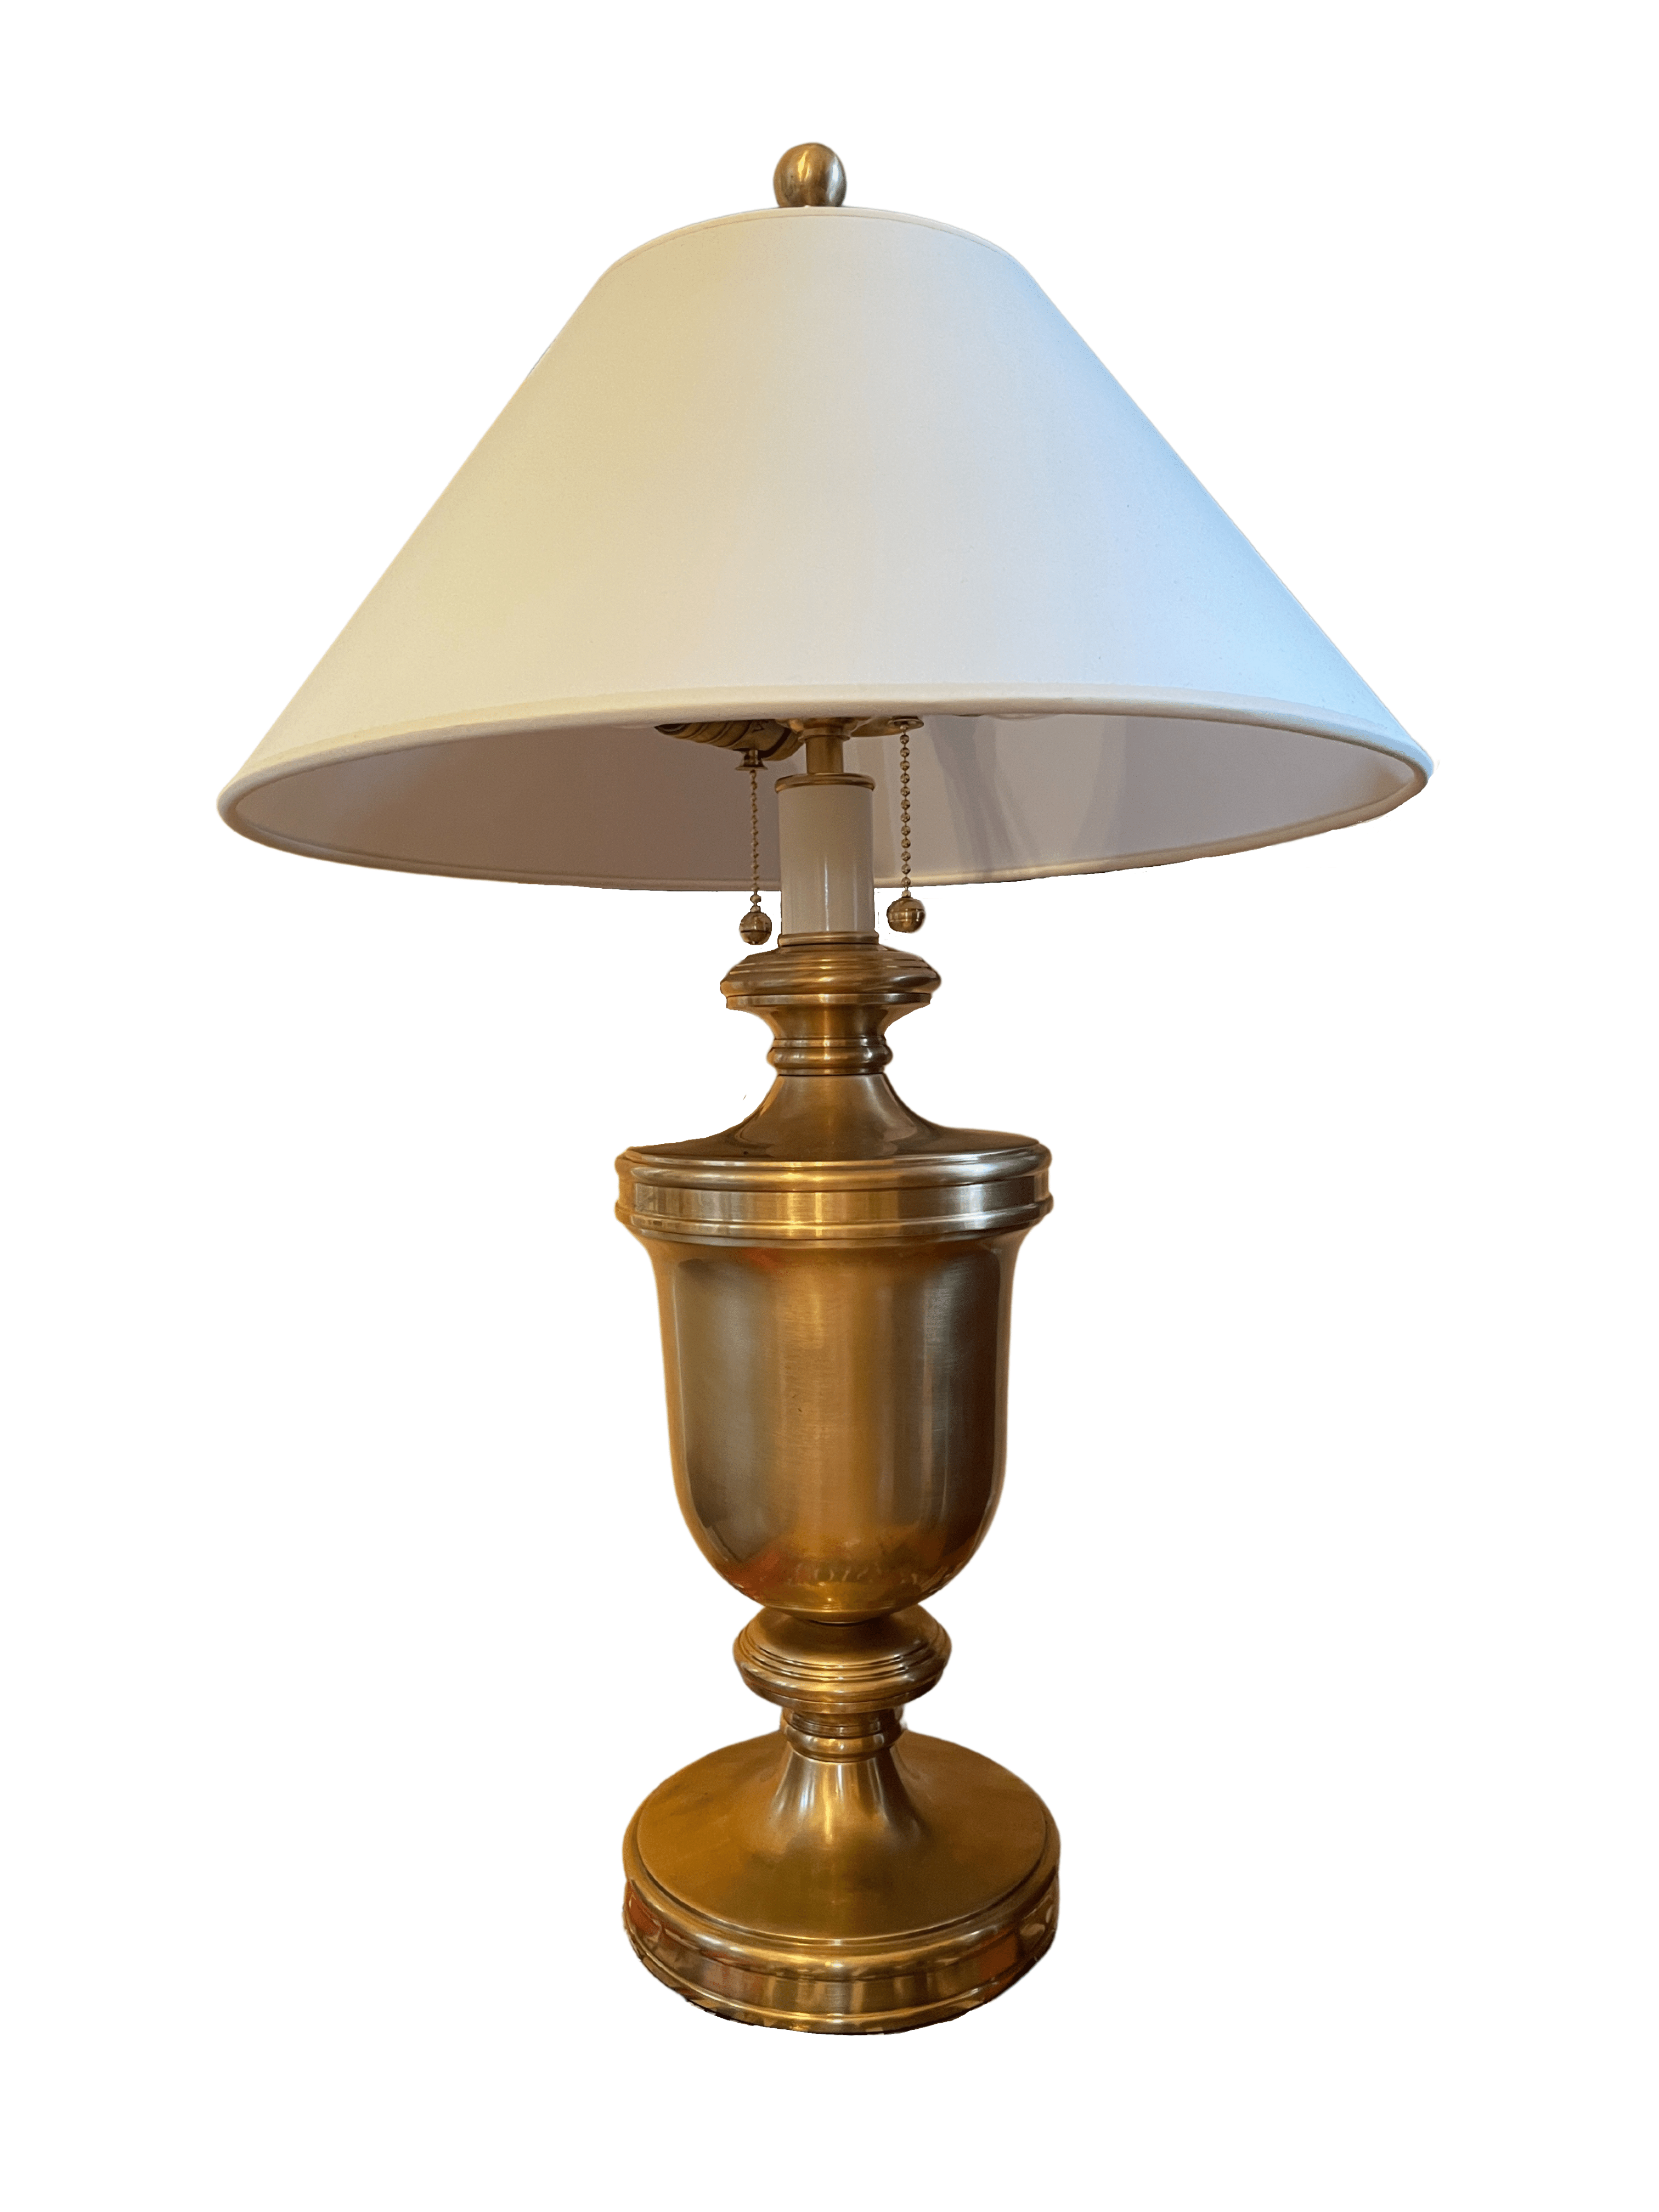 Brass Urn Lamp With "Coolie" Shade